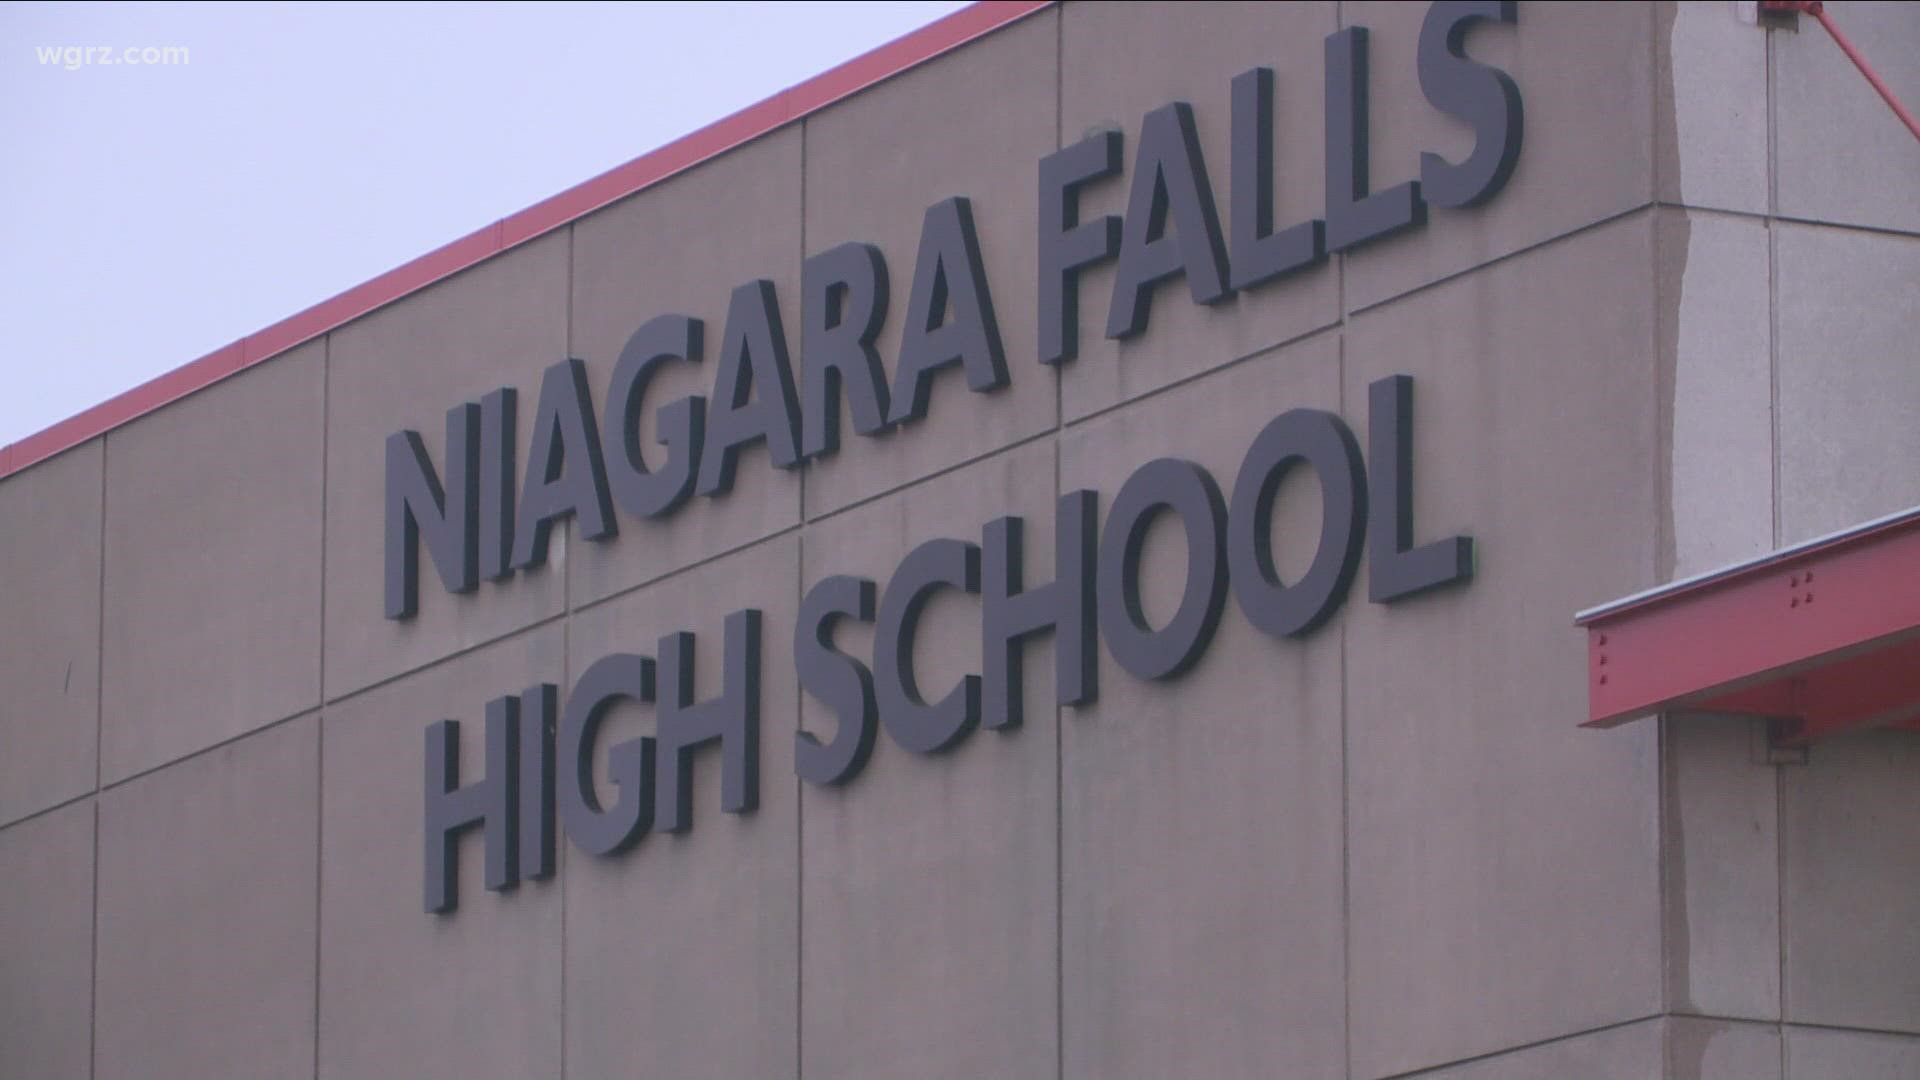 High School students in Niagara Falls are getting dismissed from school 30 minutes earlier, as a way to help with bussing problems caused by a driver shortage.